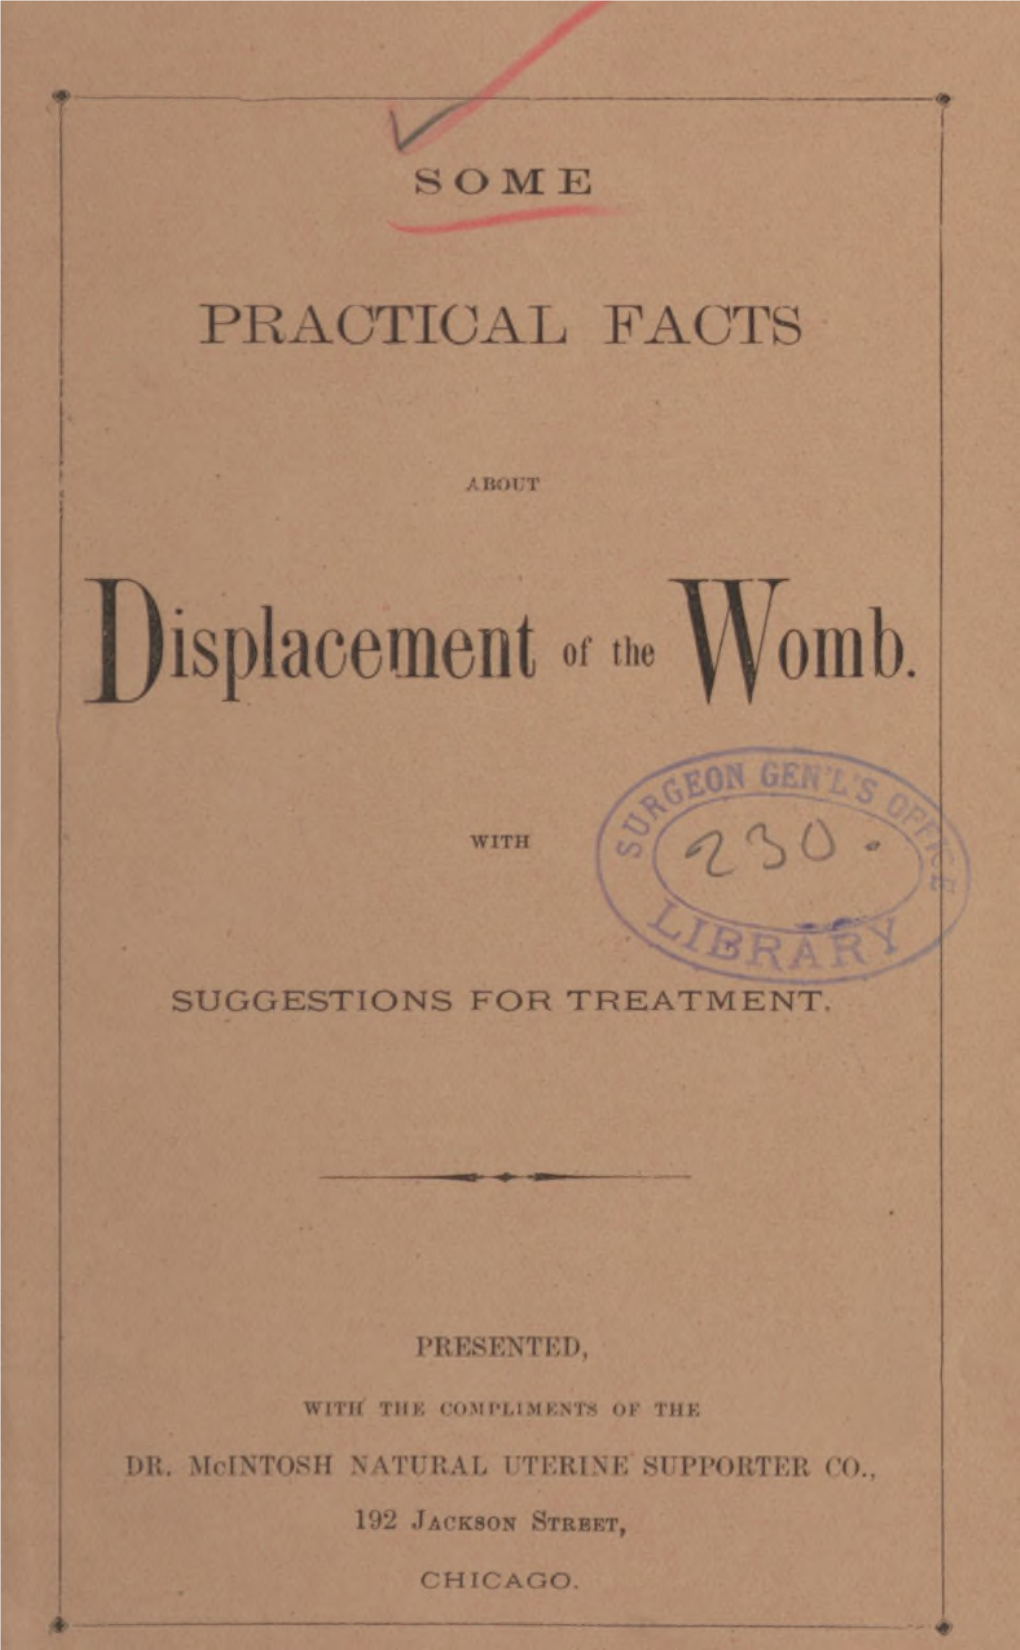 Some Practical Facts About Displacement of the Womb, with Suggestions for Treatment